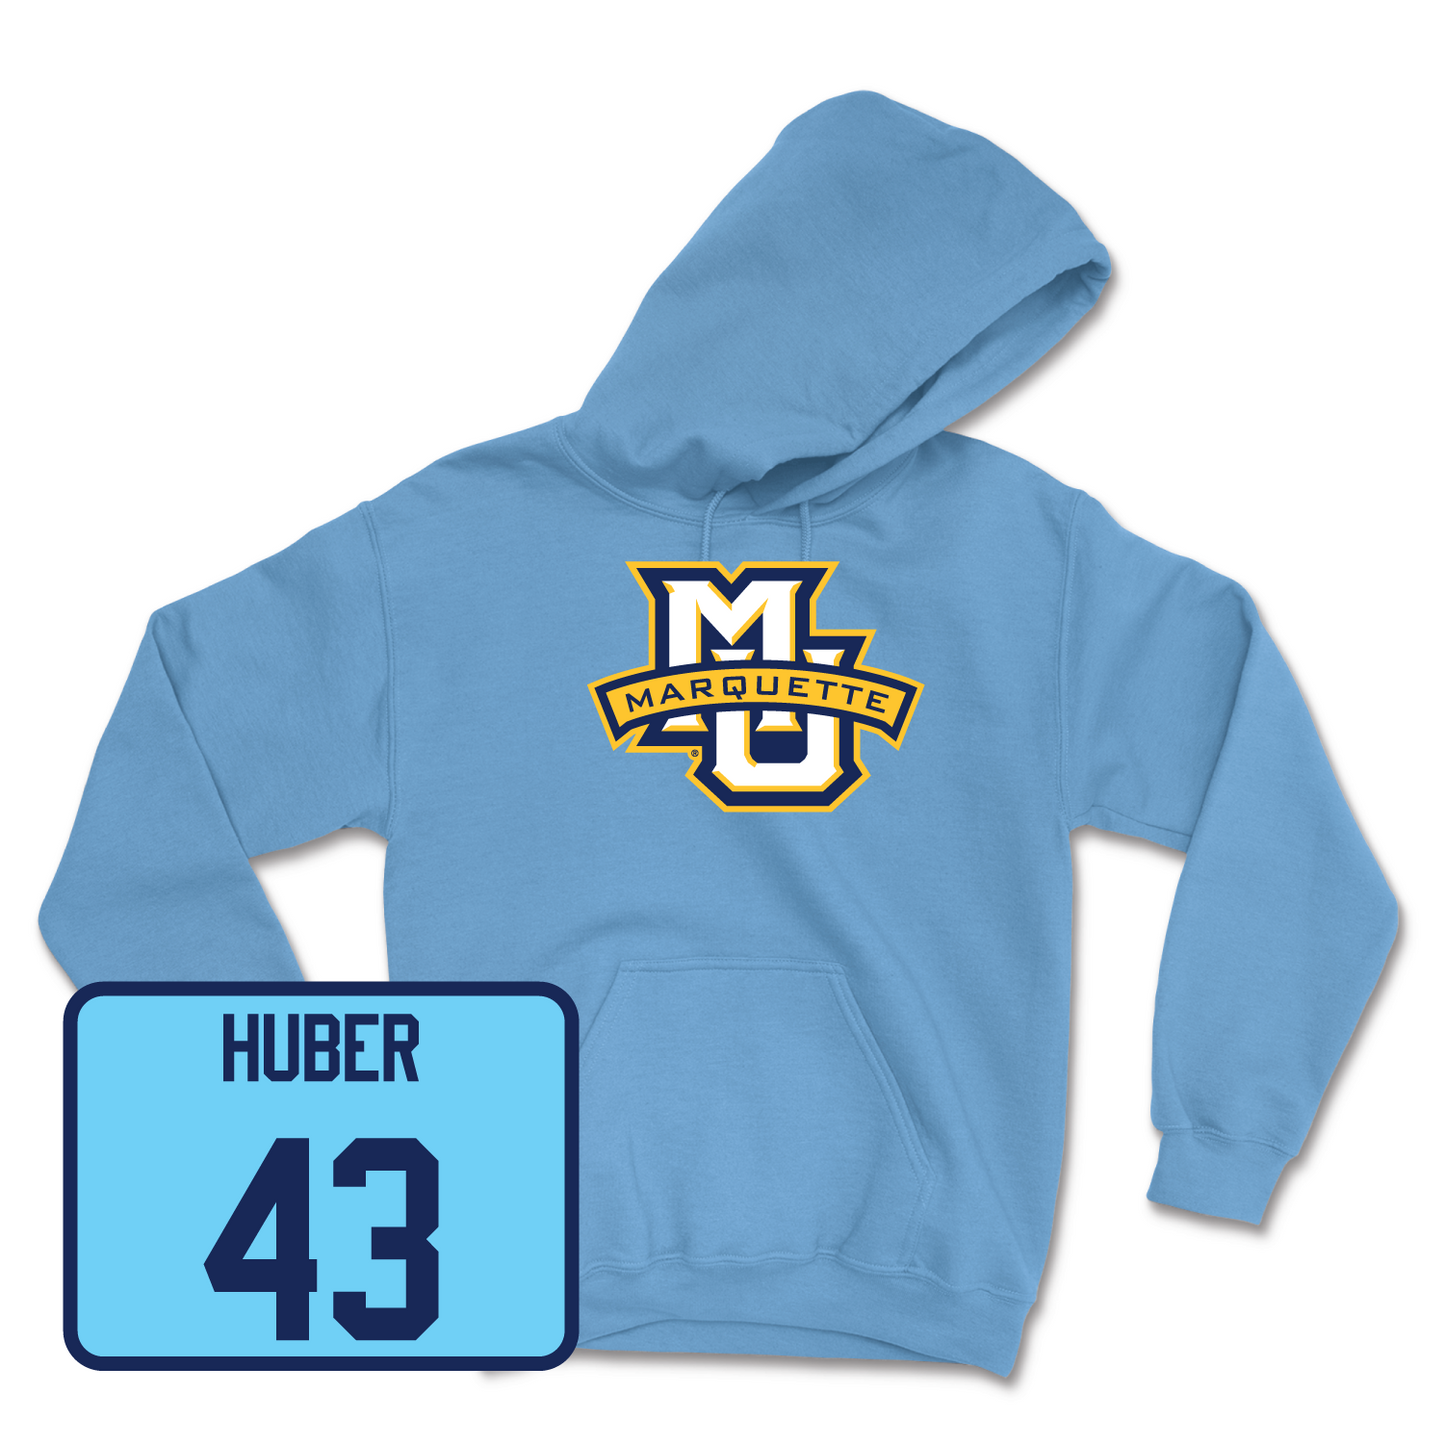 Championship Blue Women's Lacrosse Marquette Hoodie 2 X-Large / Kaitlyn Huber | #43